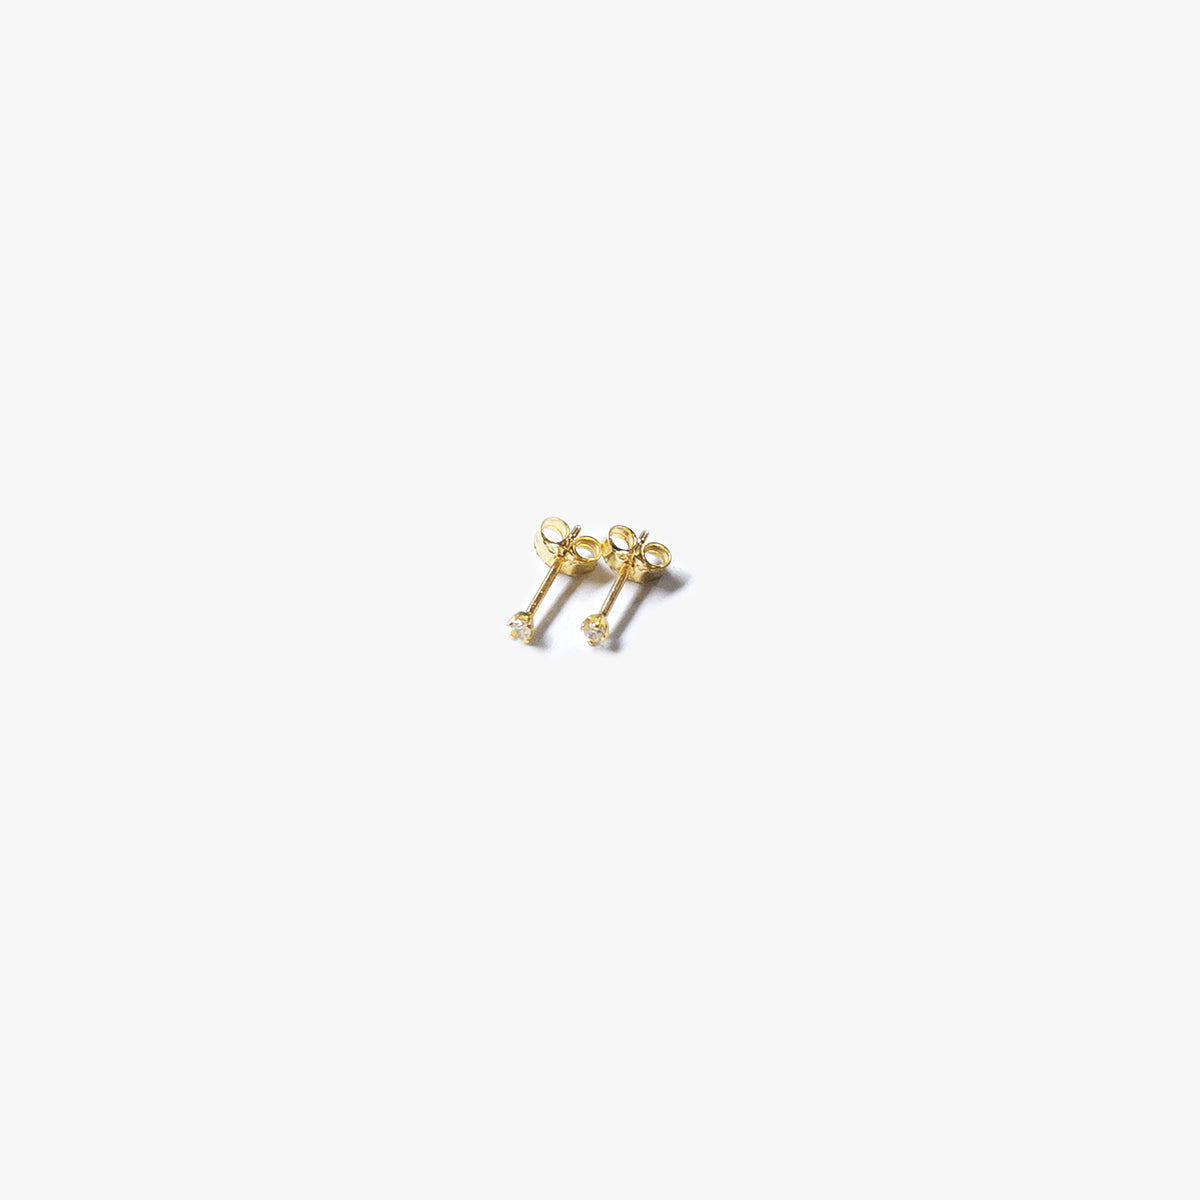 The Ultra Tiny Solitaire Earrings in Solid Gold